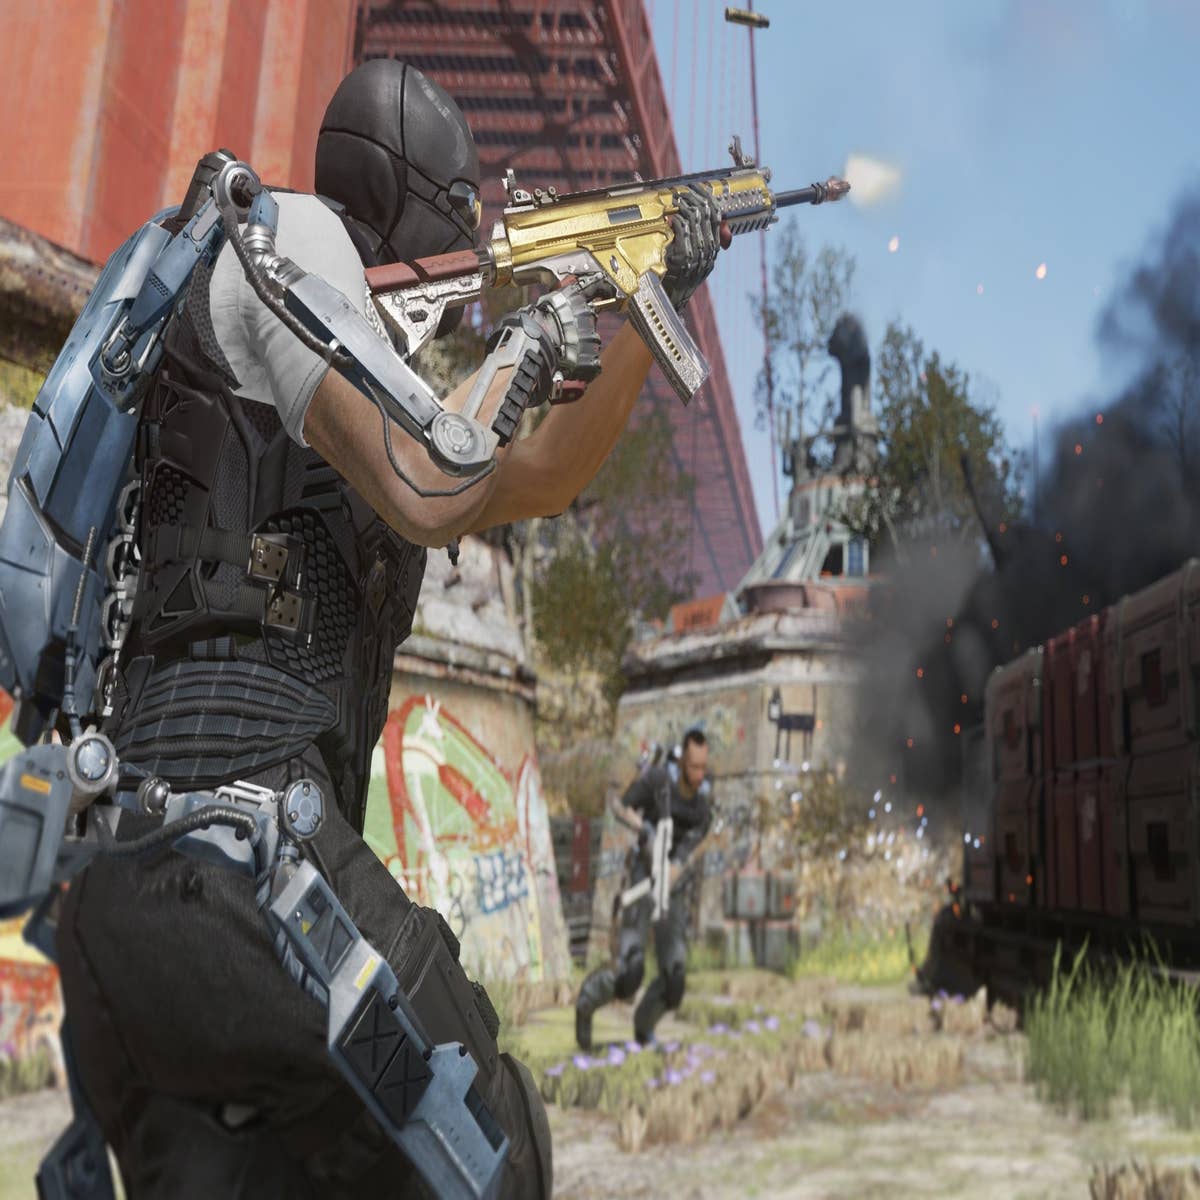 Call of Duty: Advanced Warfare Exo Survival Co-Op Mode - First Details -  MP1st